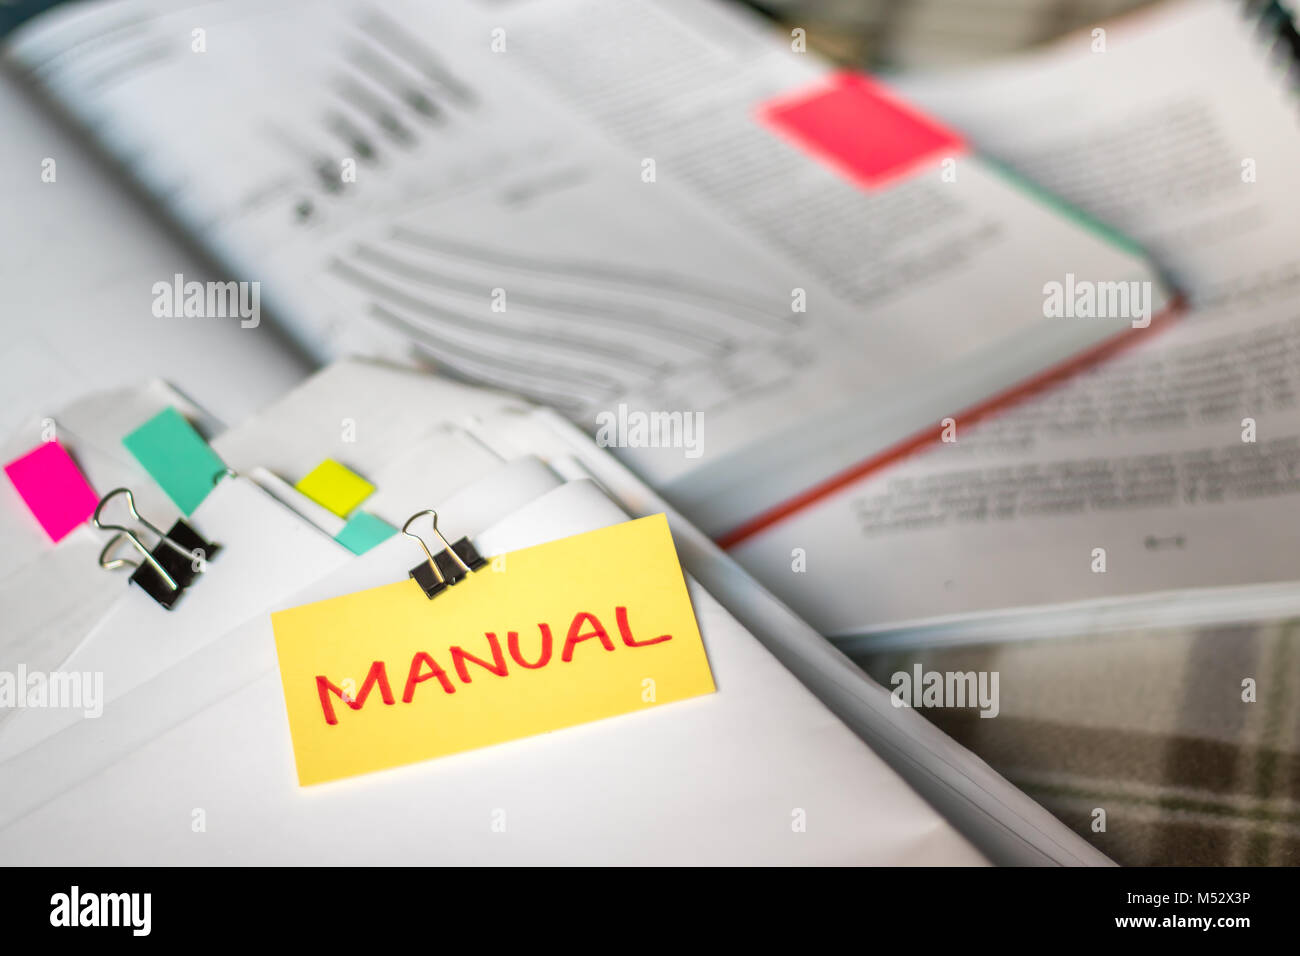 Manual; Stack of Documents with Large Amount of Analytic Material. Stock Photo